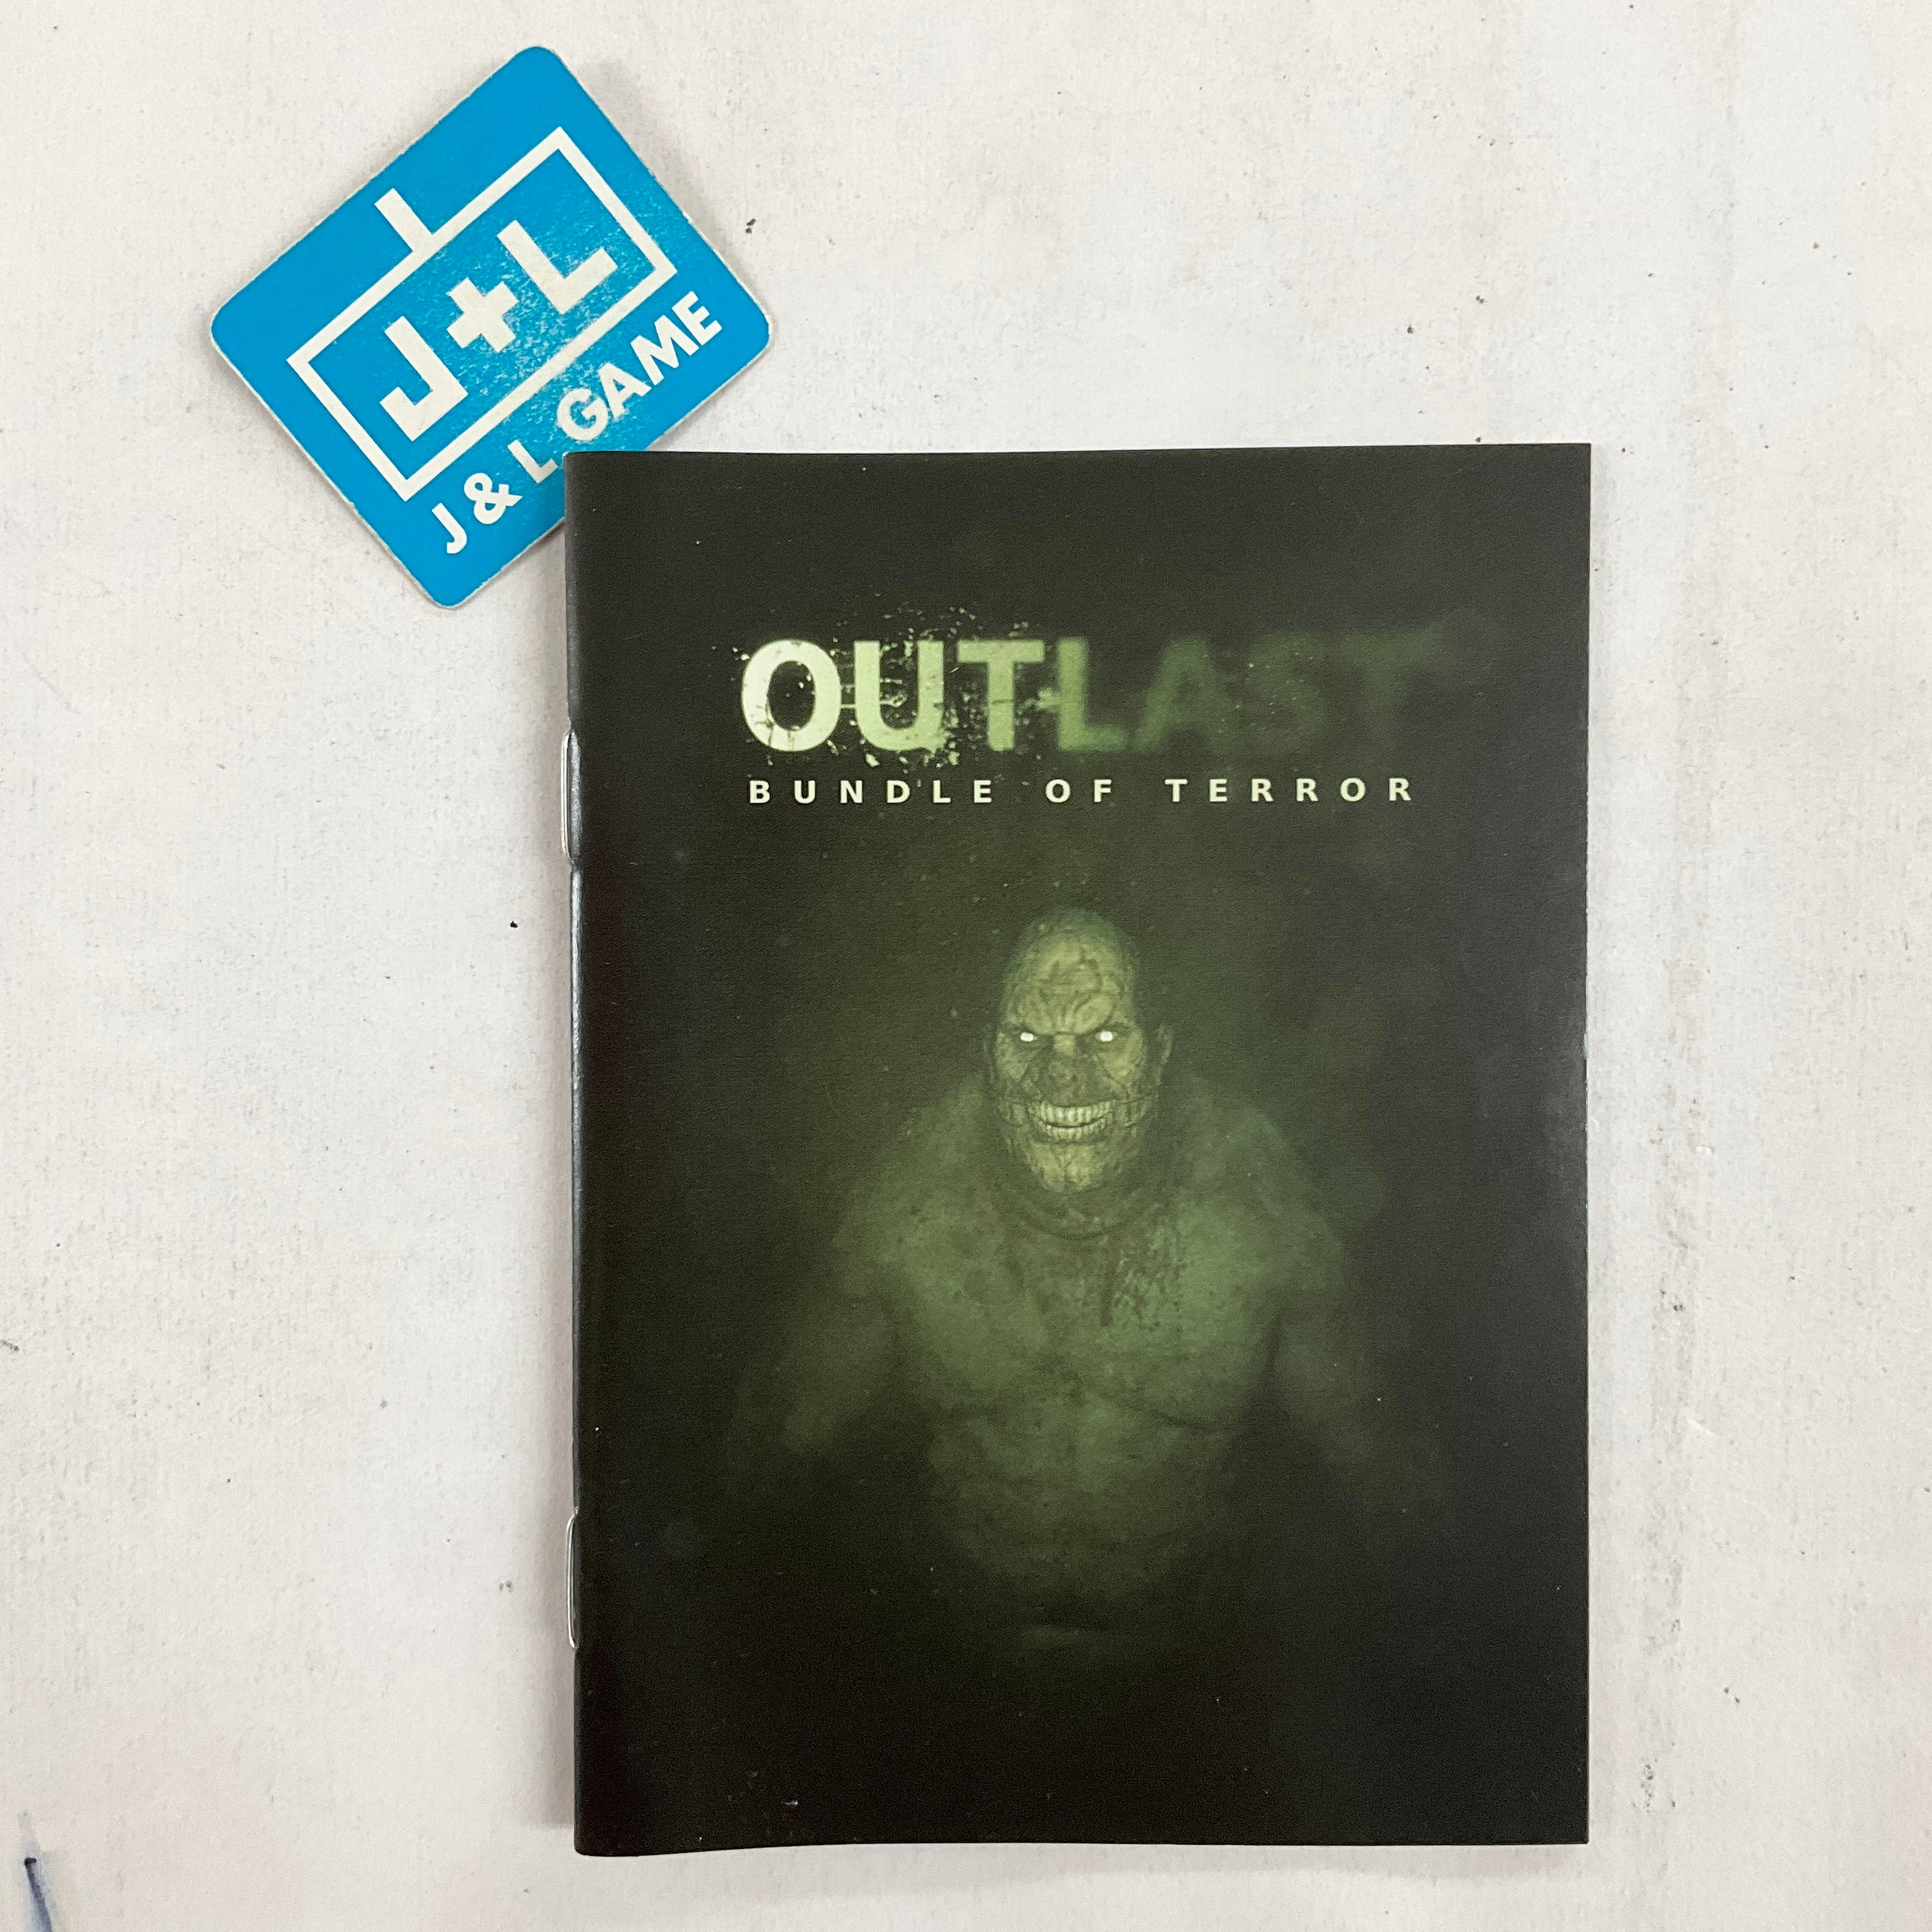 Outlast Bundle of Terror / Outlast 2 (Limited Run #017 #018) - (NSW) Nintendo Switch [Pre-Owned] Video Games Limited Run Games   